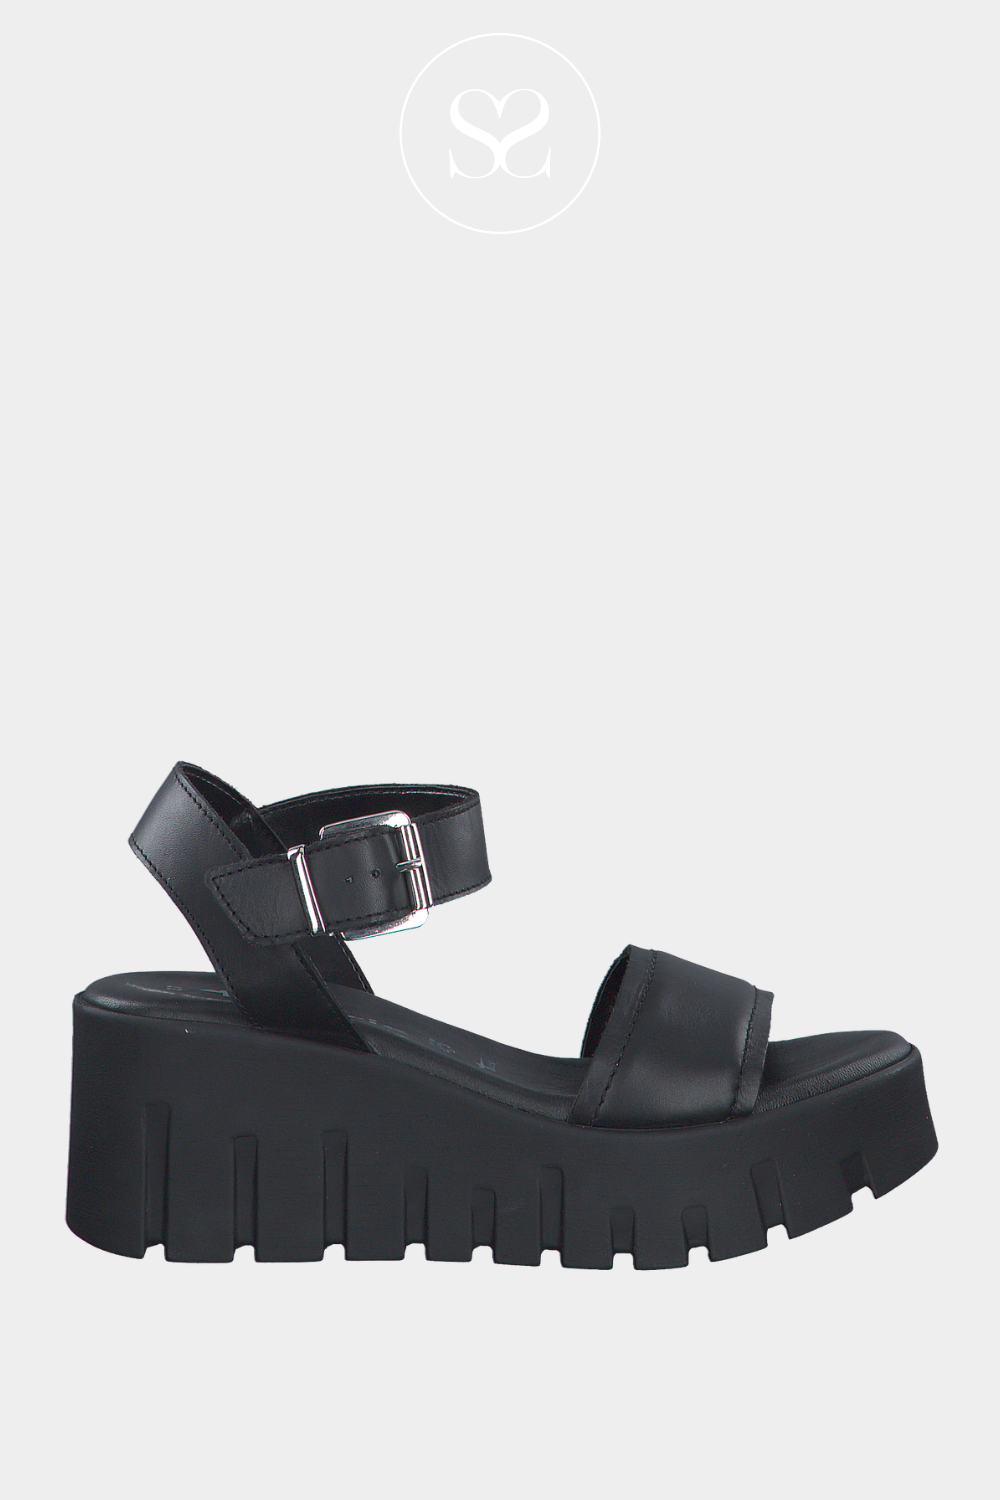 TAMARIS 1-28712-42 BLACK WEDGE PLATFORM SANDALS WITH TRACKER SOLE AND THICK STRAP WITH ADJUSTABLE ANKLE STRAP